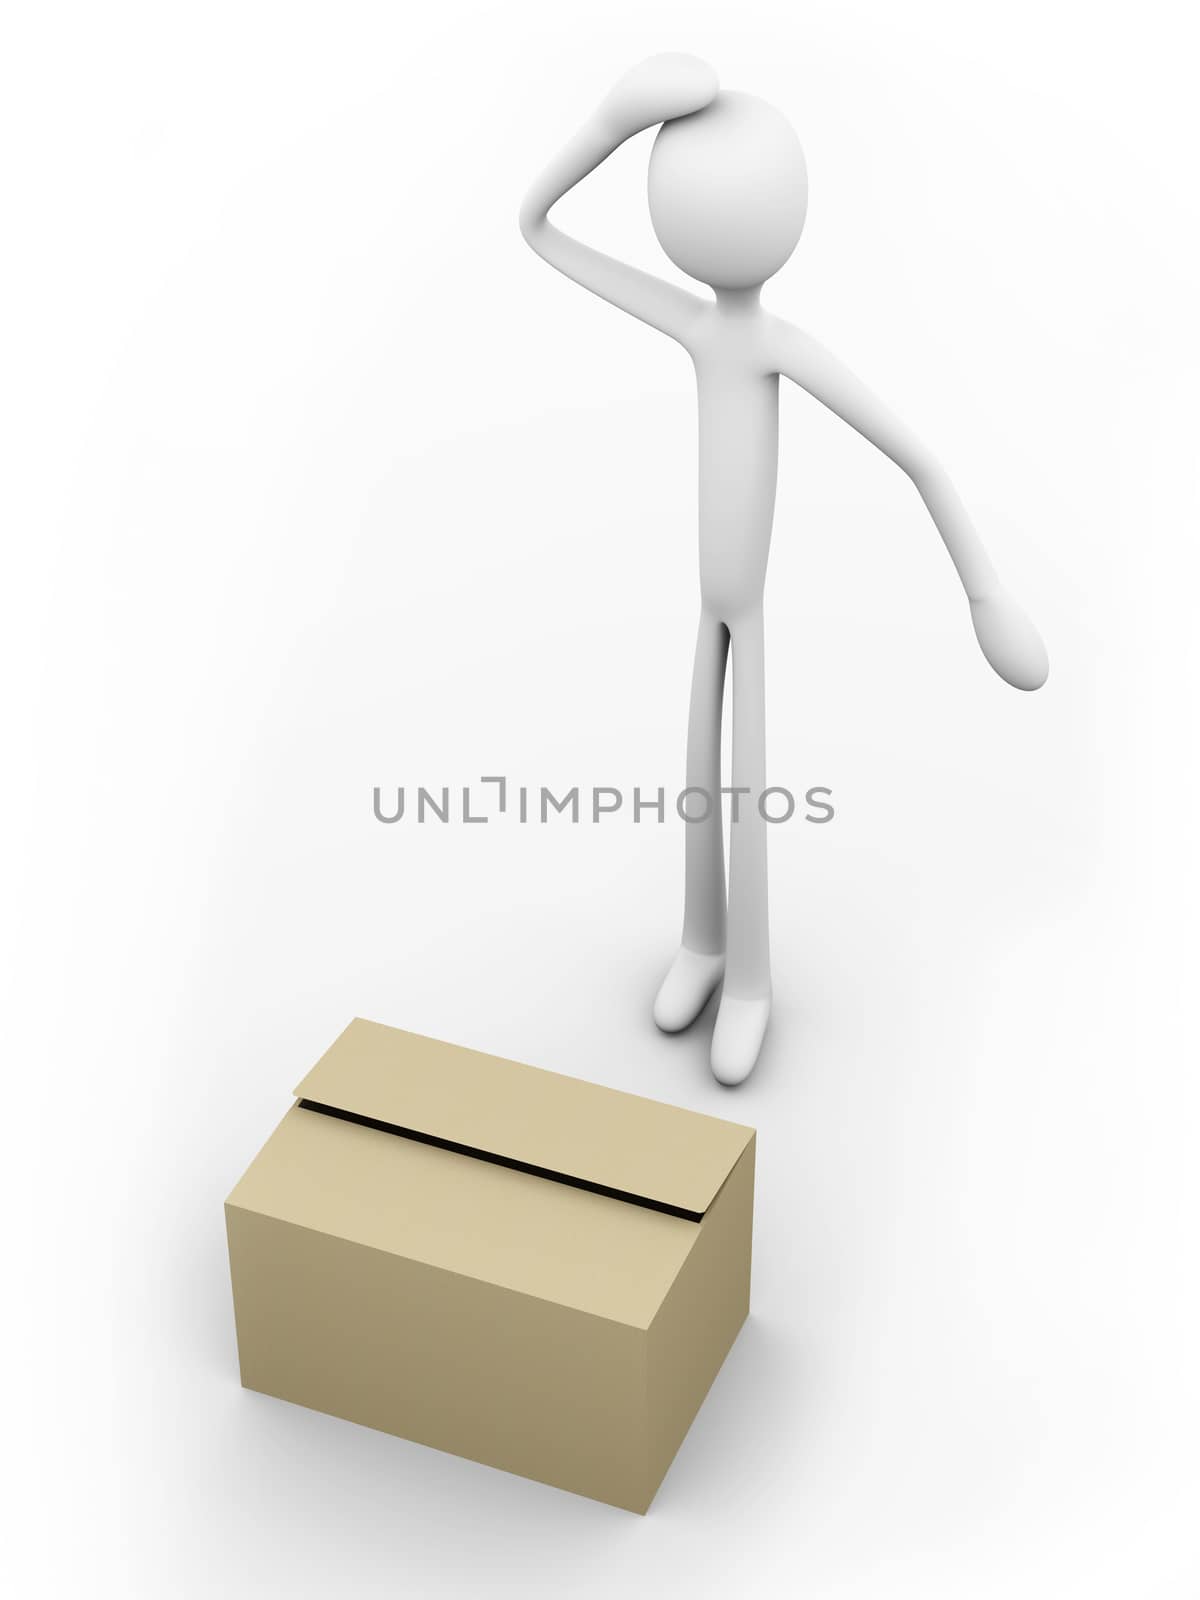 3D rendered Illustration. Isolated on white. What`s inside?